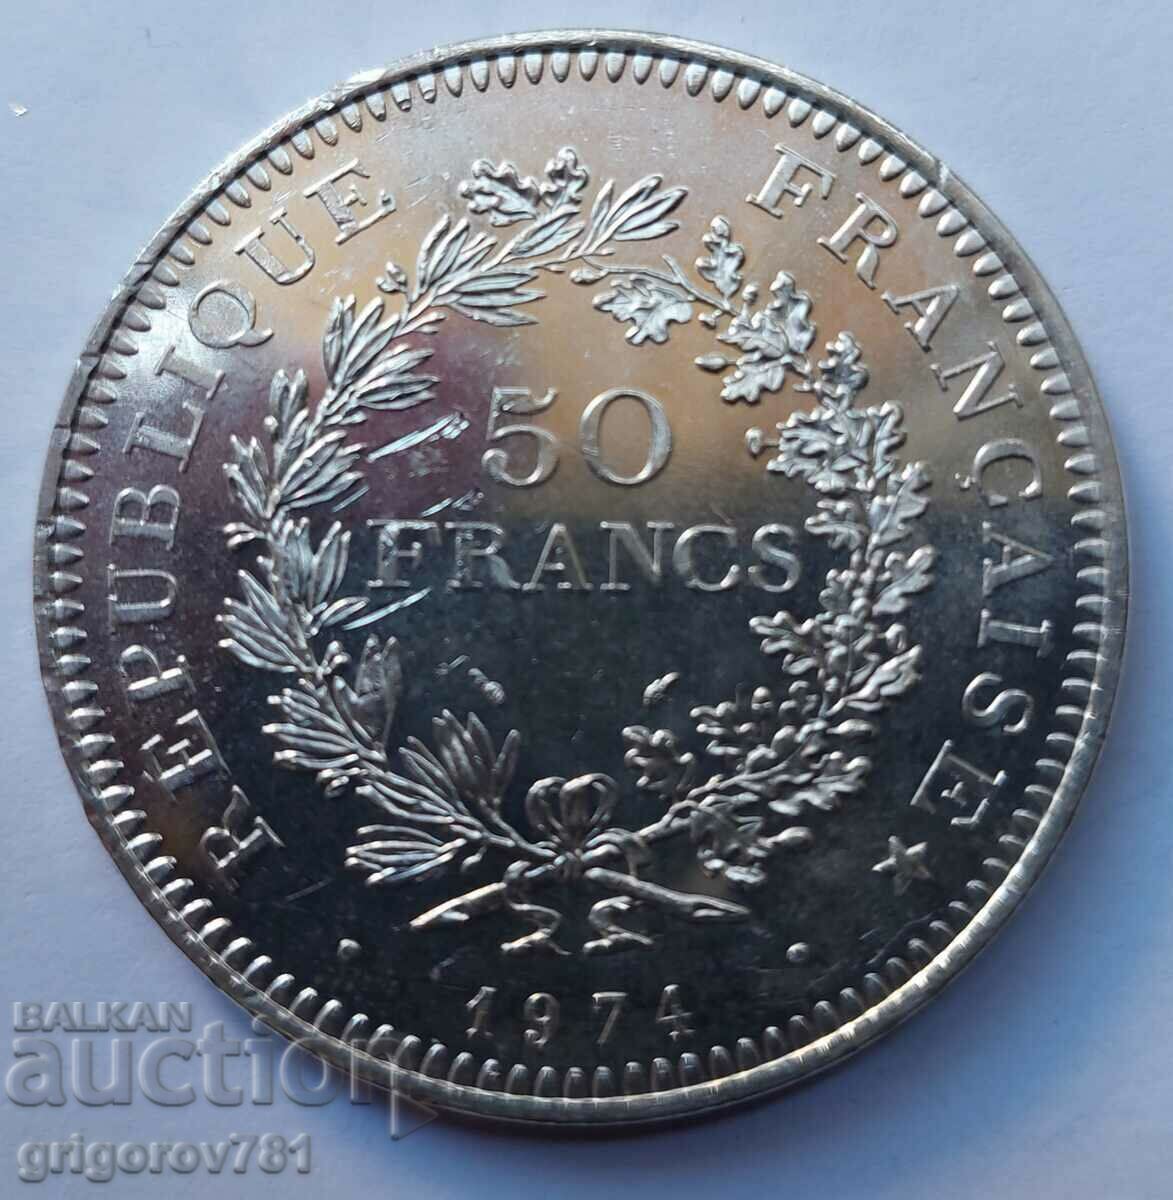 50 Francs Silver France 1974 - Silver Coin #15